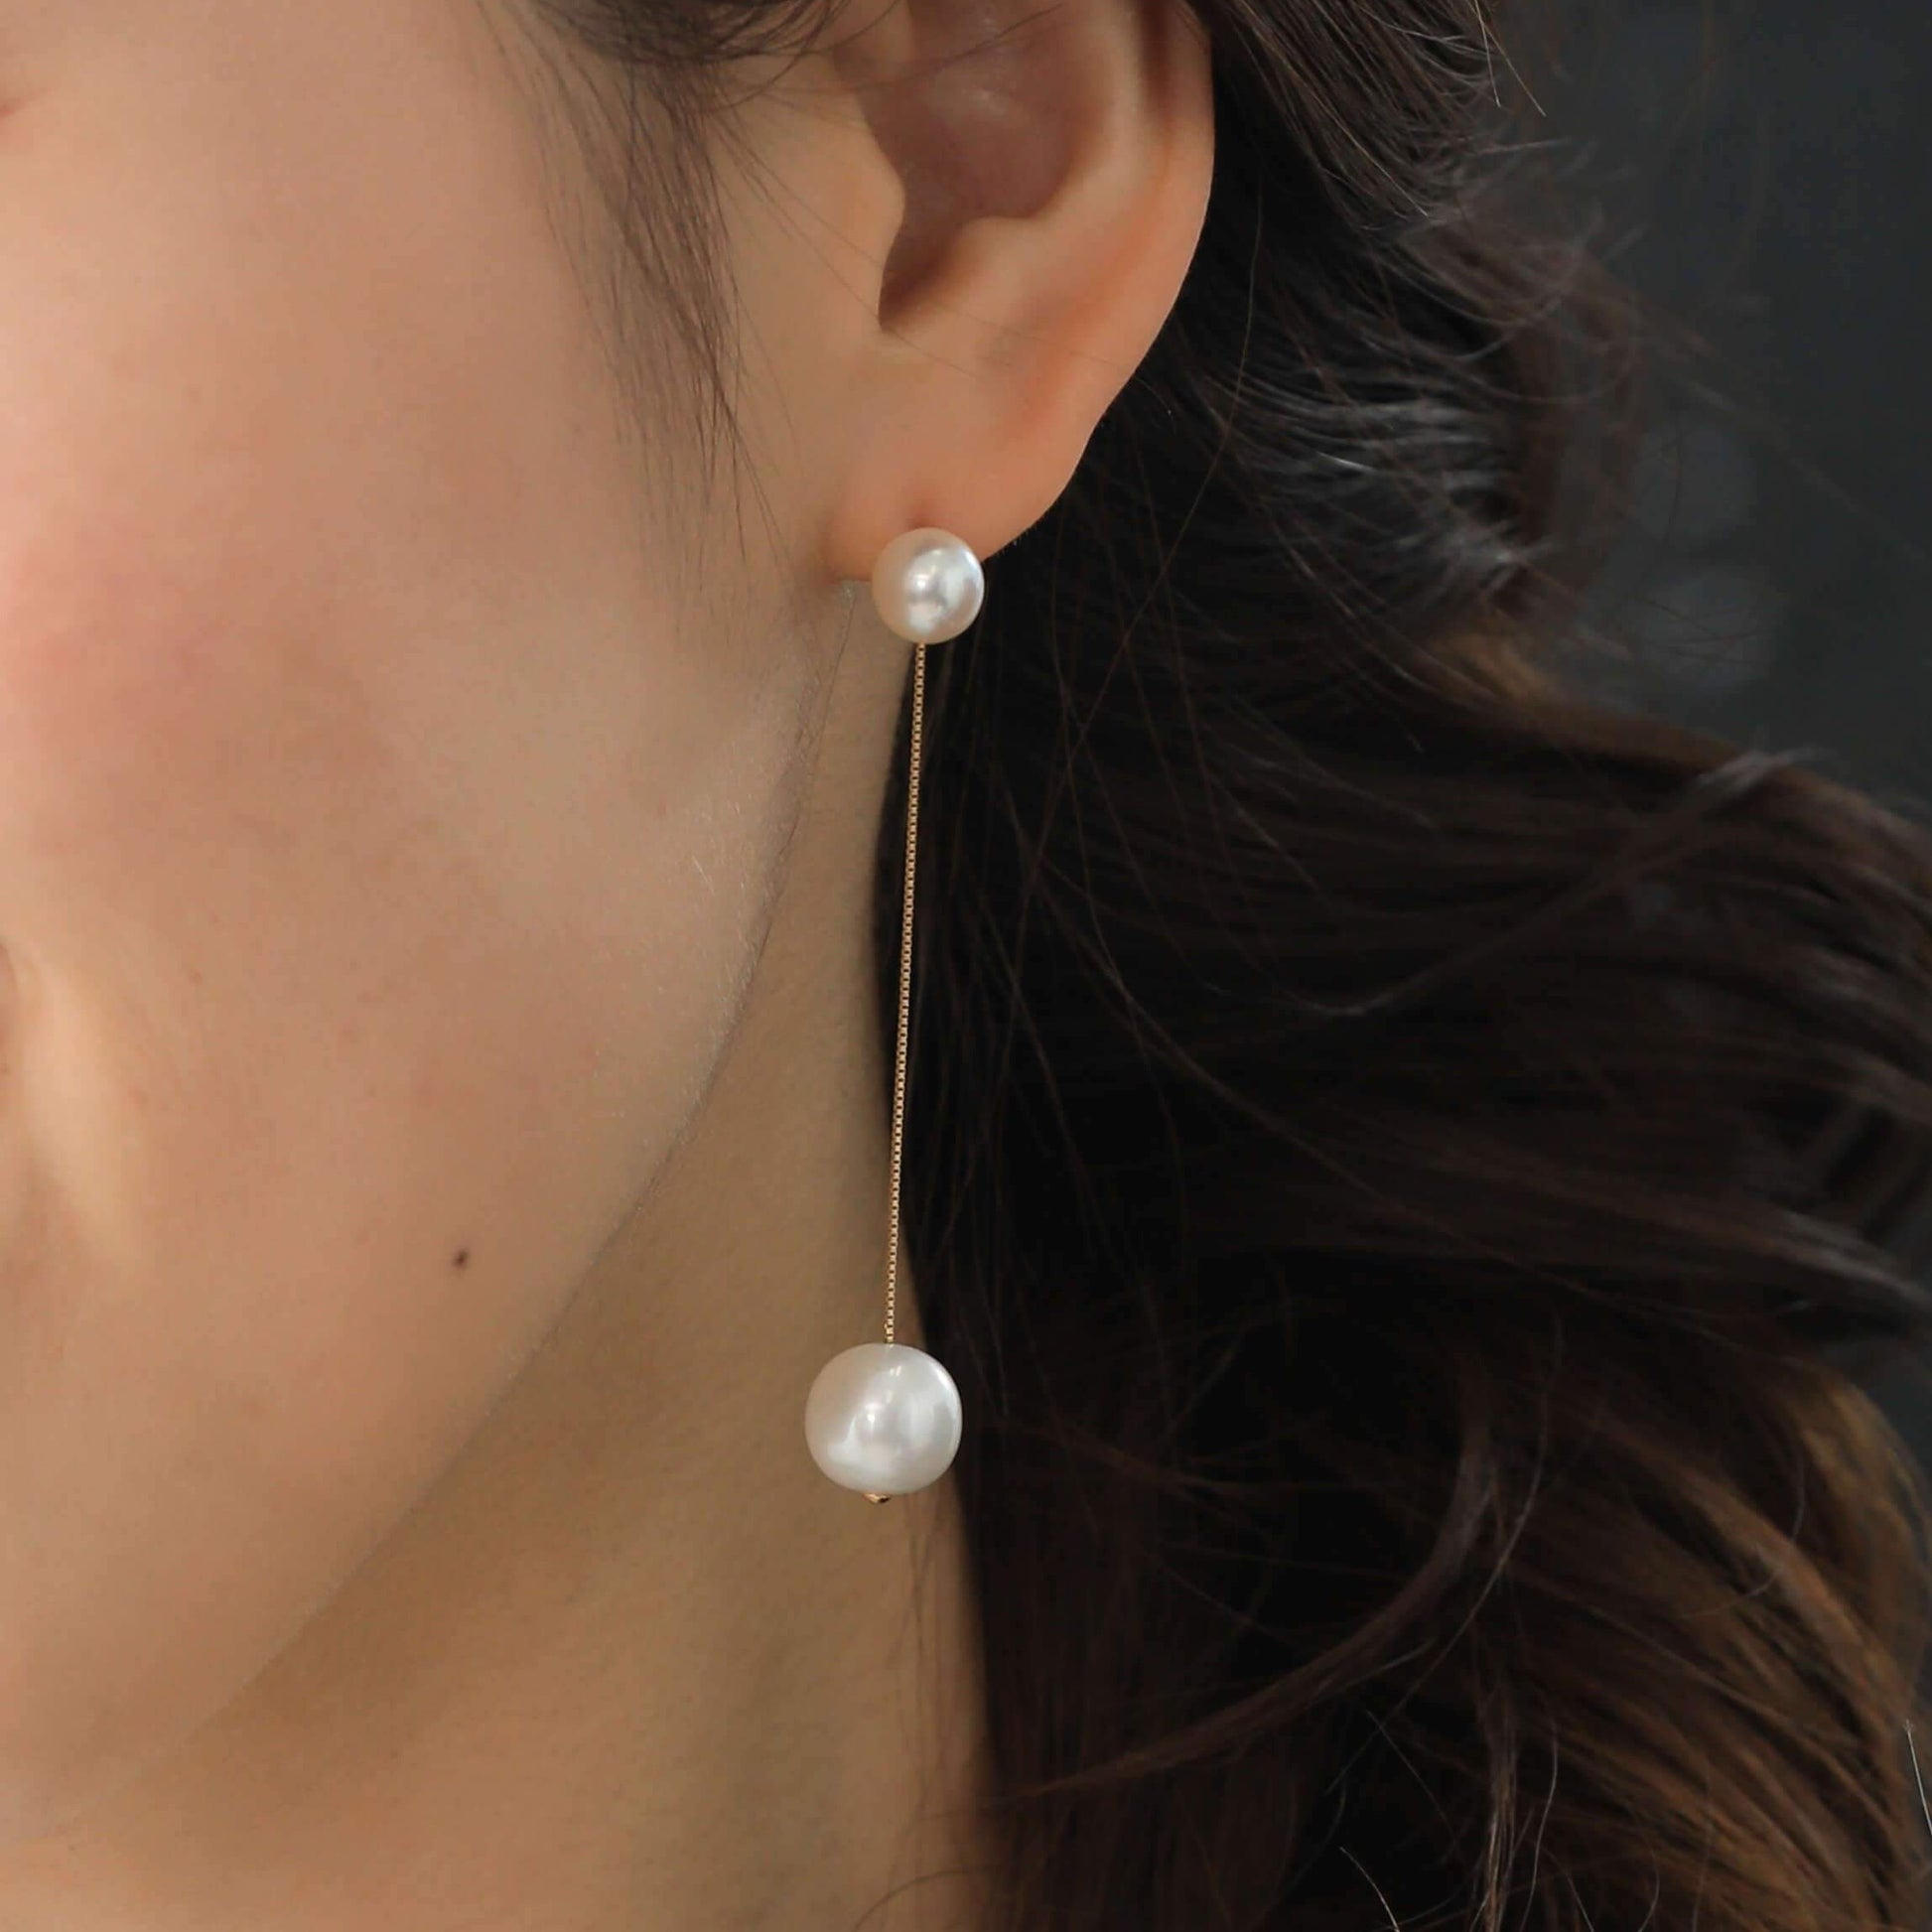 Enhance your elegance with Sway Pearl Piercing - a radiant woman wearing pearl earrings and beaming with joy.